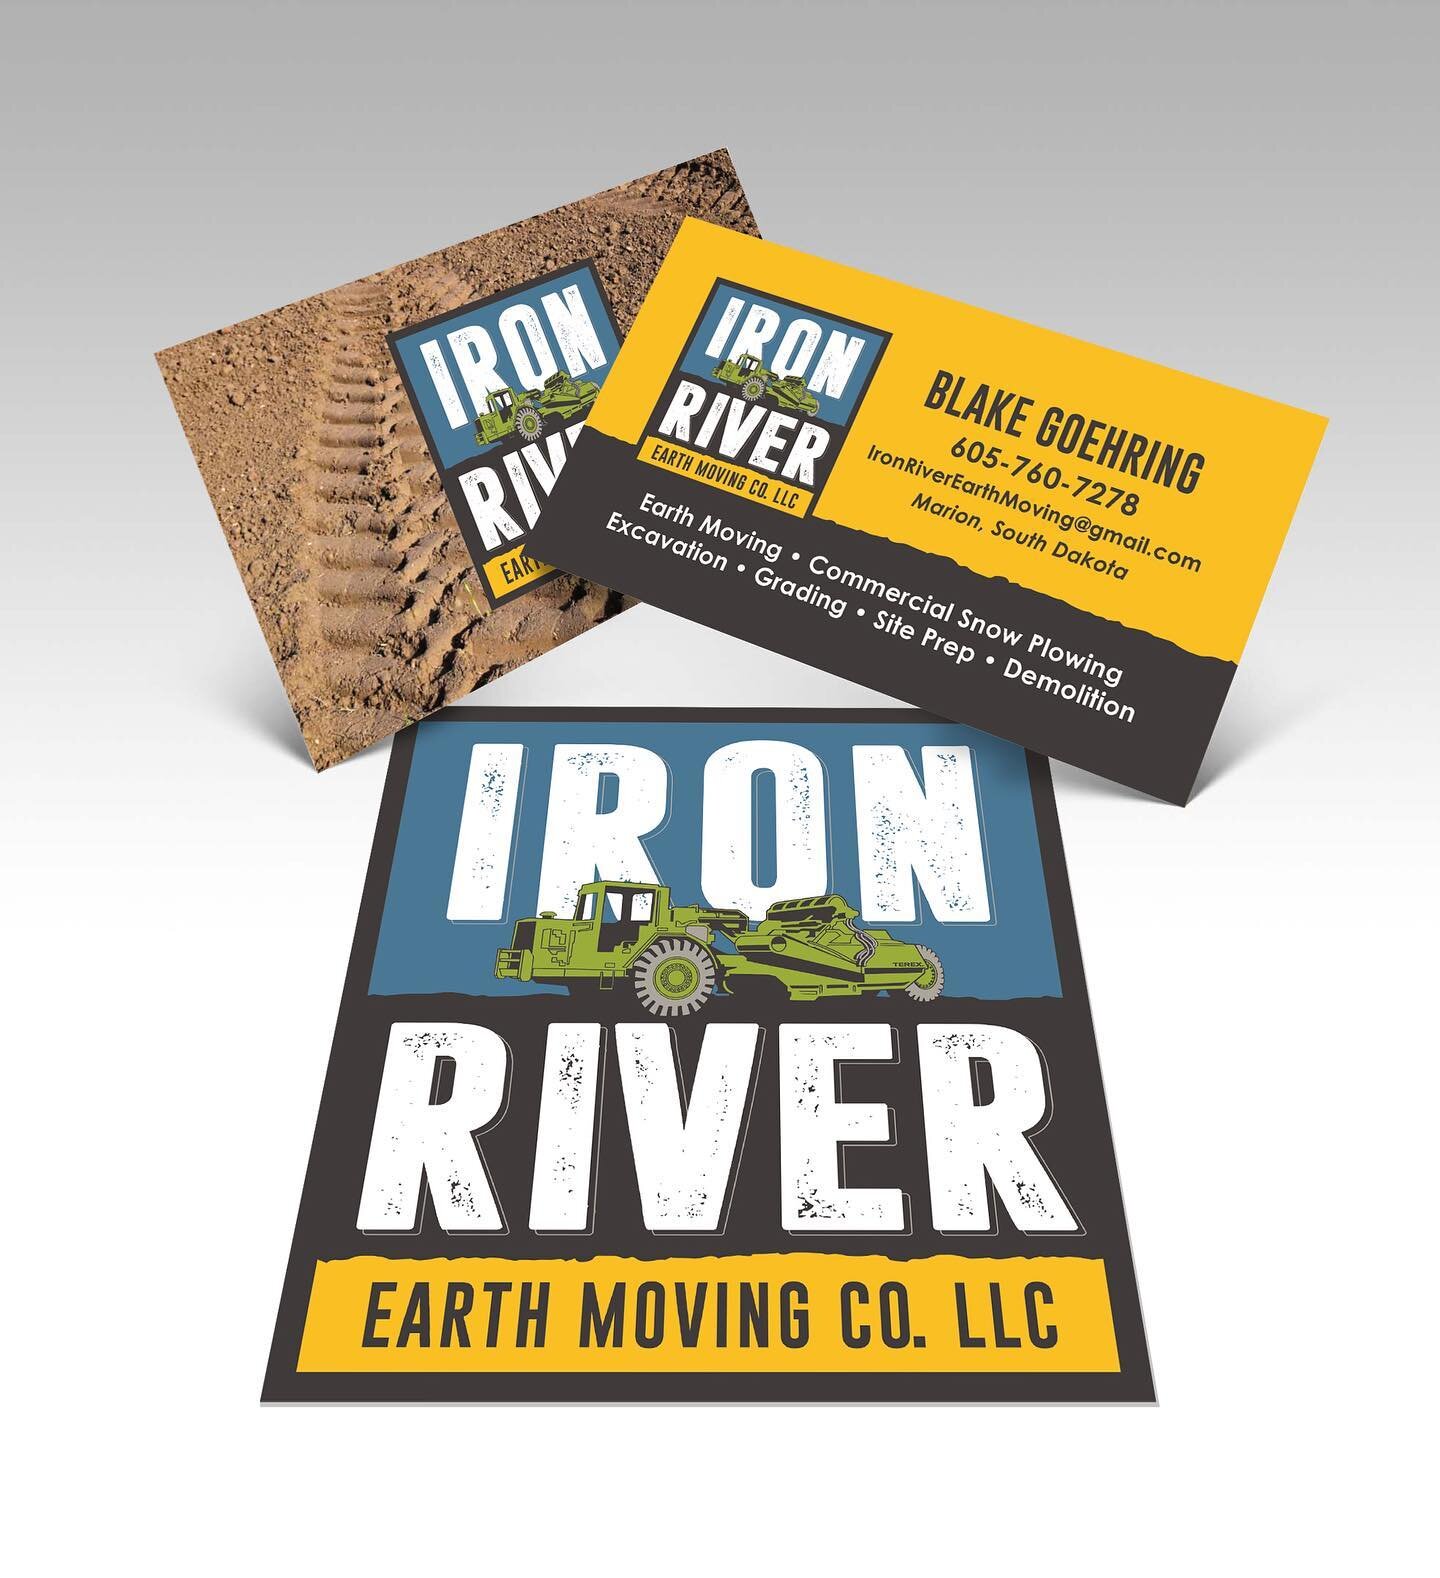 Sat hello to Iron Rivers new logo and business card design! If you need some dirty-dirt work done, let Blake know!